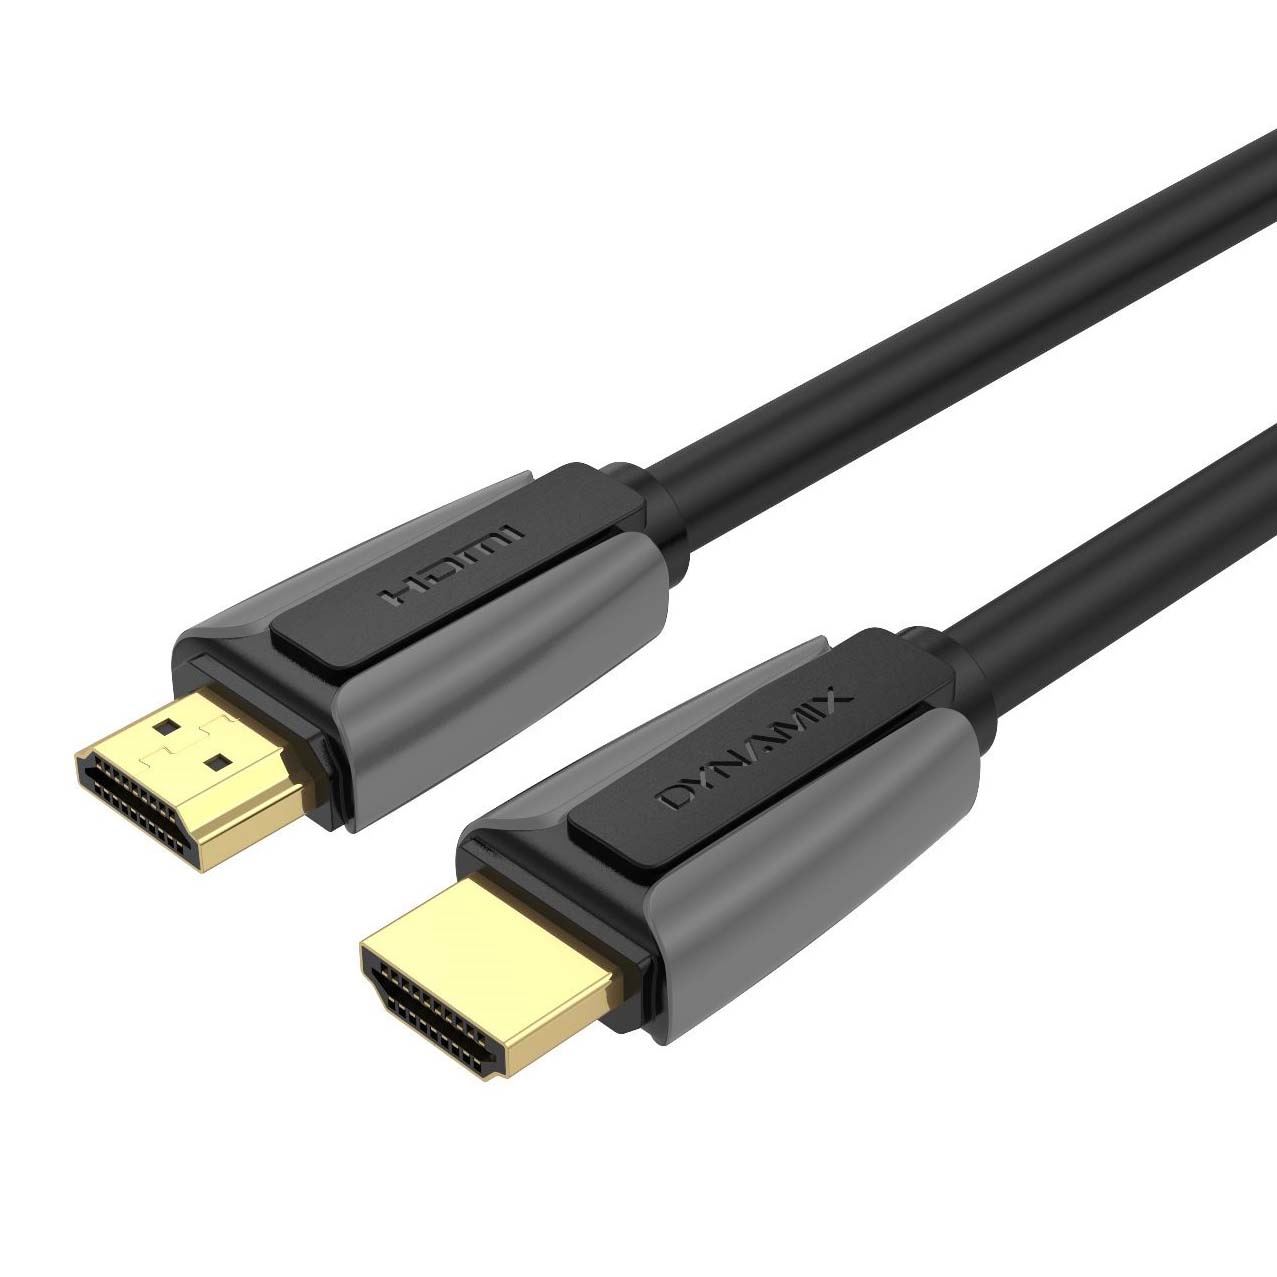 DYNAMIX_3M_HDMI_2.1_Ultra-High_Speed_48Gbps_Cable._Supports_up_to_8K@120Hz._Supports_Dolby_True_HD_7.1,_HDR10+,_Dolby_Vision_IQ,_eARC,_VRR,_HFR,_QFT,_ALLM,_QMS,_DSC,_G-Sync_&_FreeSync._Gold-Plated 821